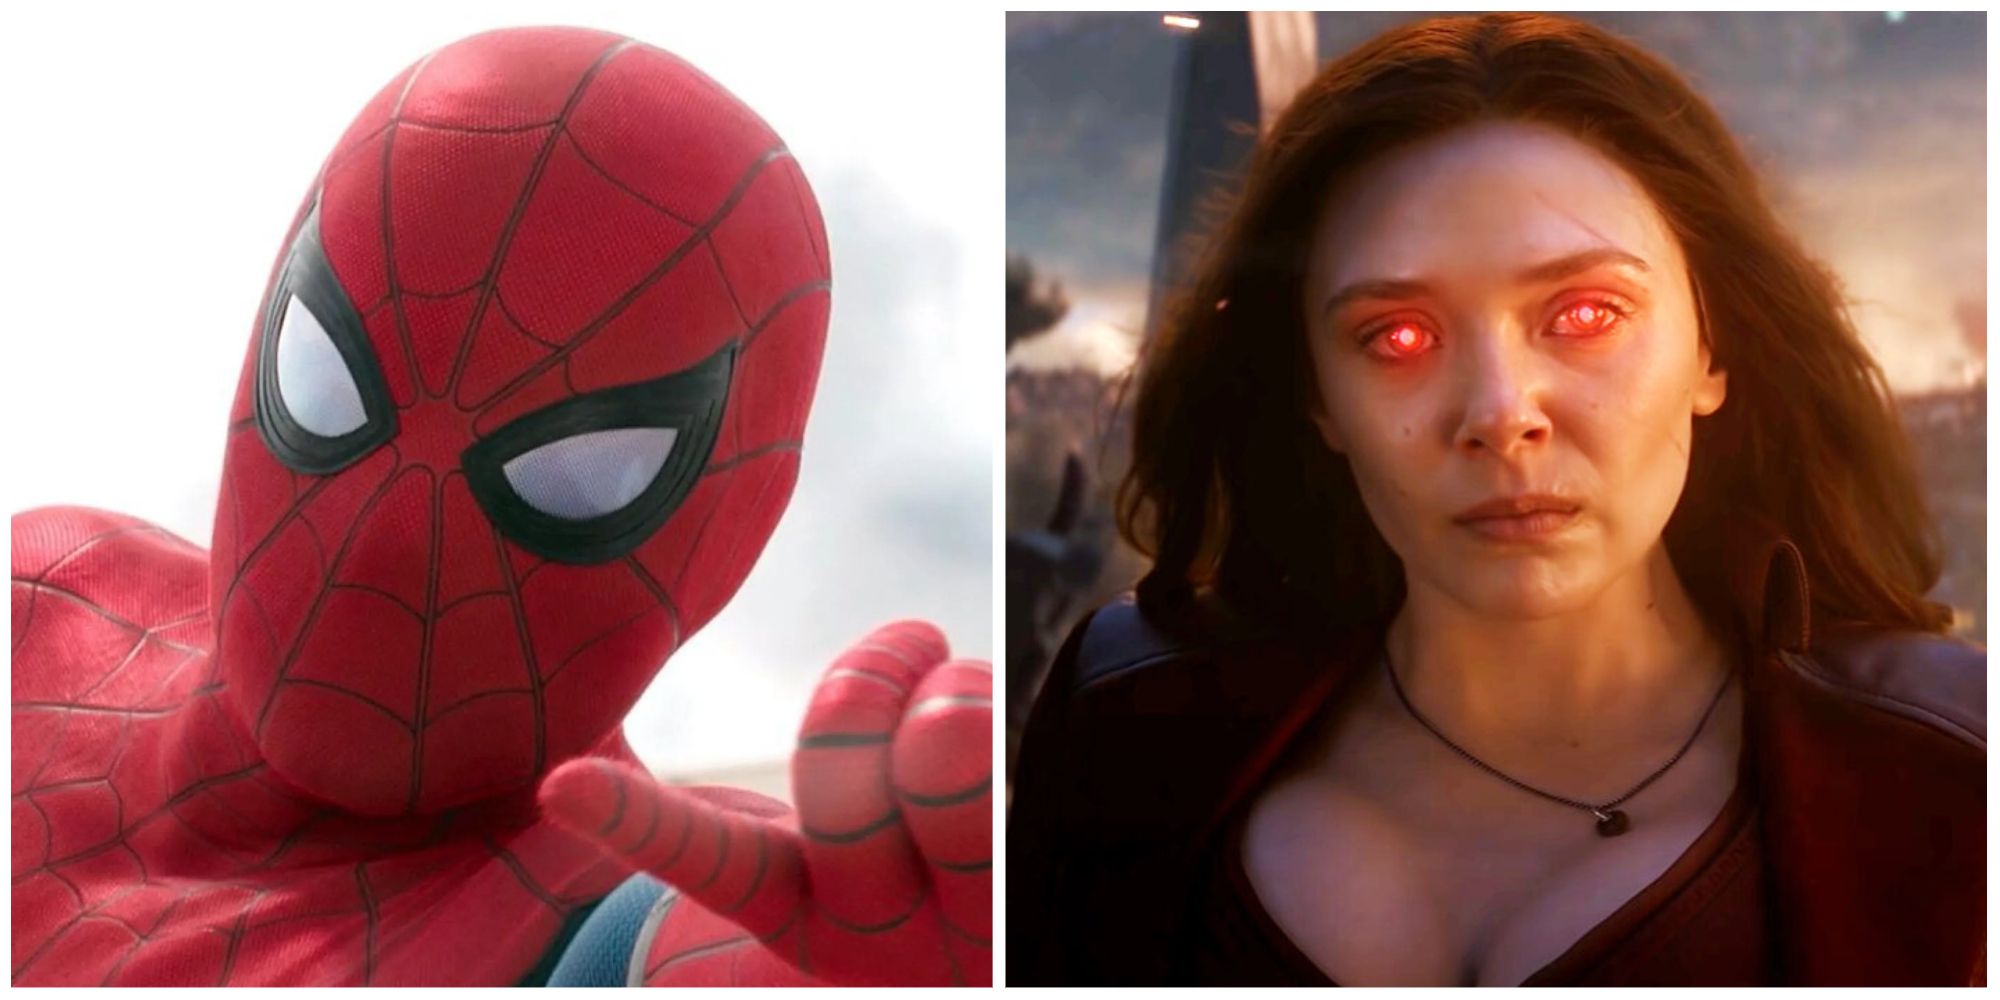 MCU Characters Who Wear The Most Impractical Clothes Wanda Scarlet Witch Peter Parker Spider-Man